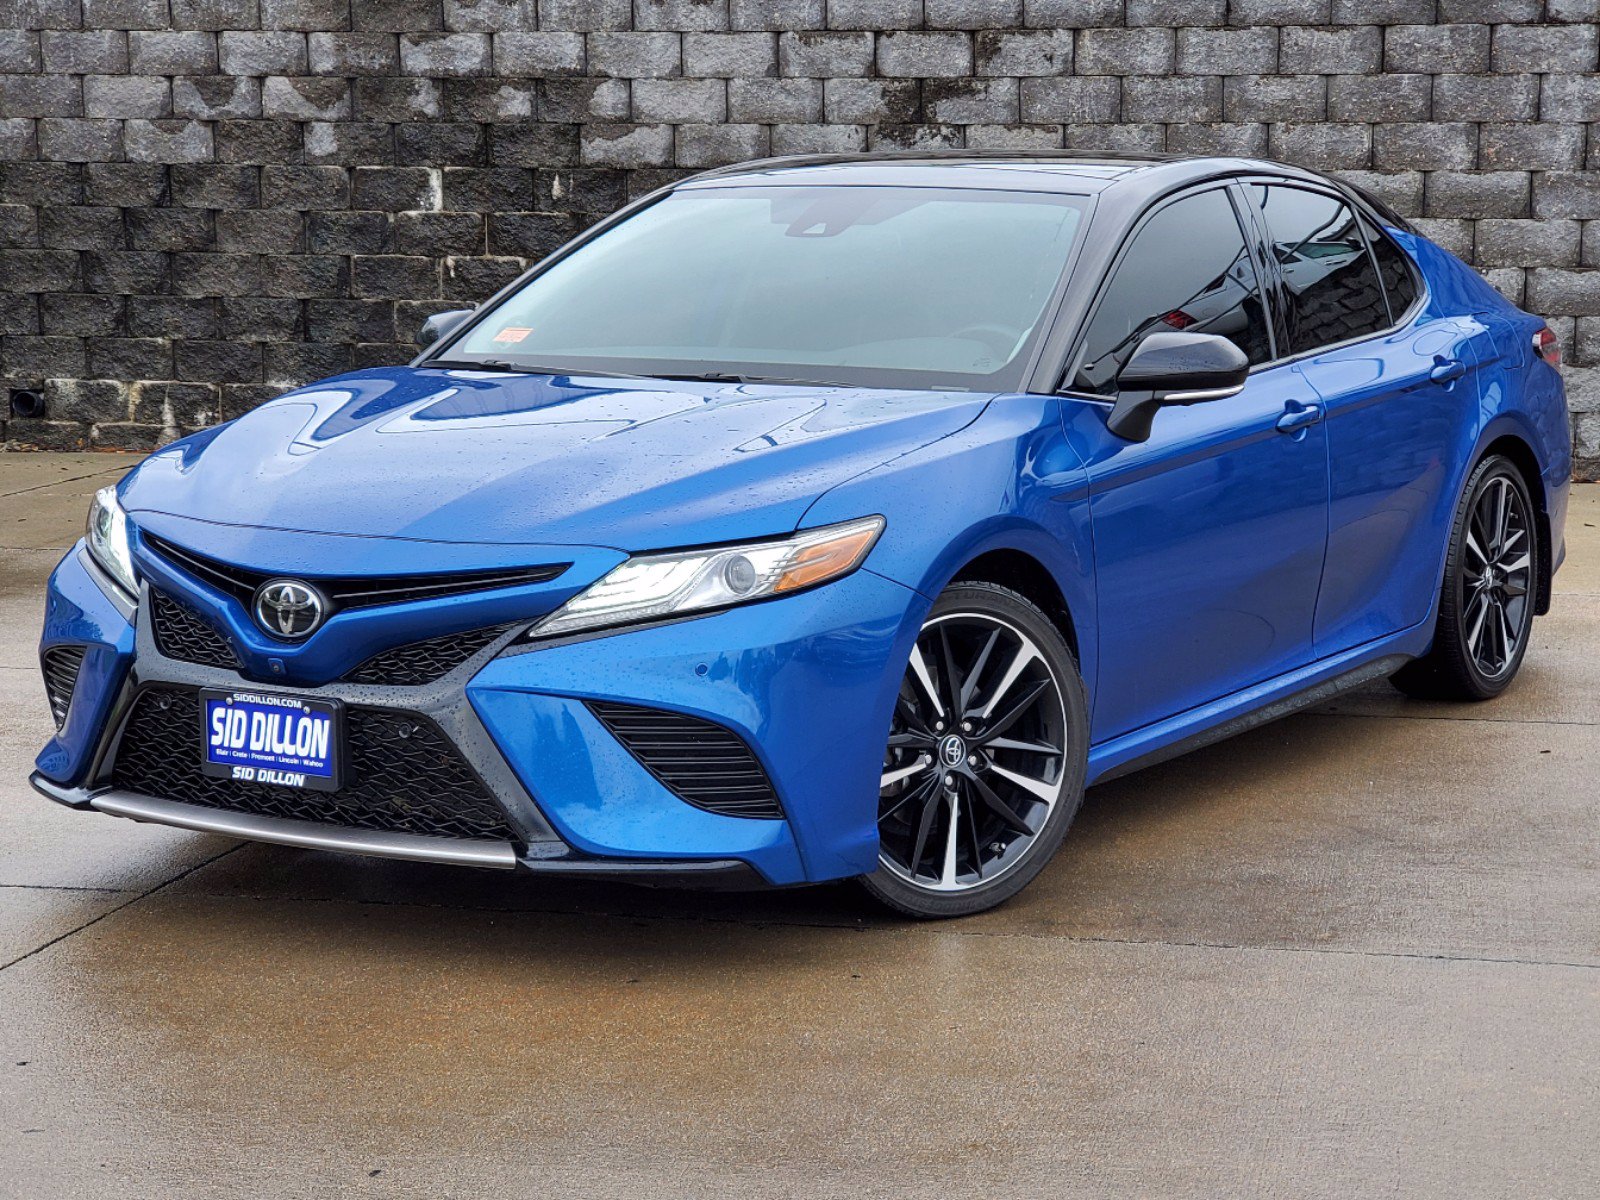 PreOwned 2019 Toyota Camry XSE V6